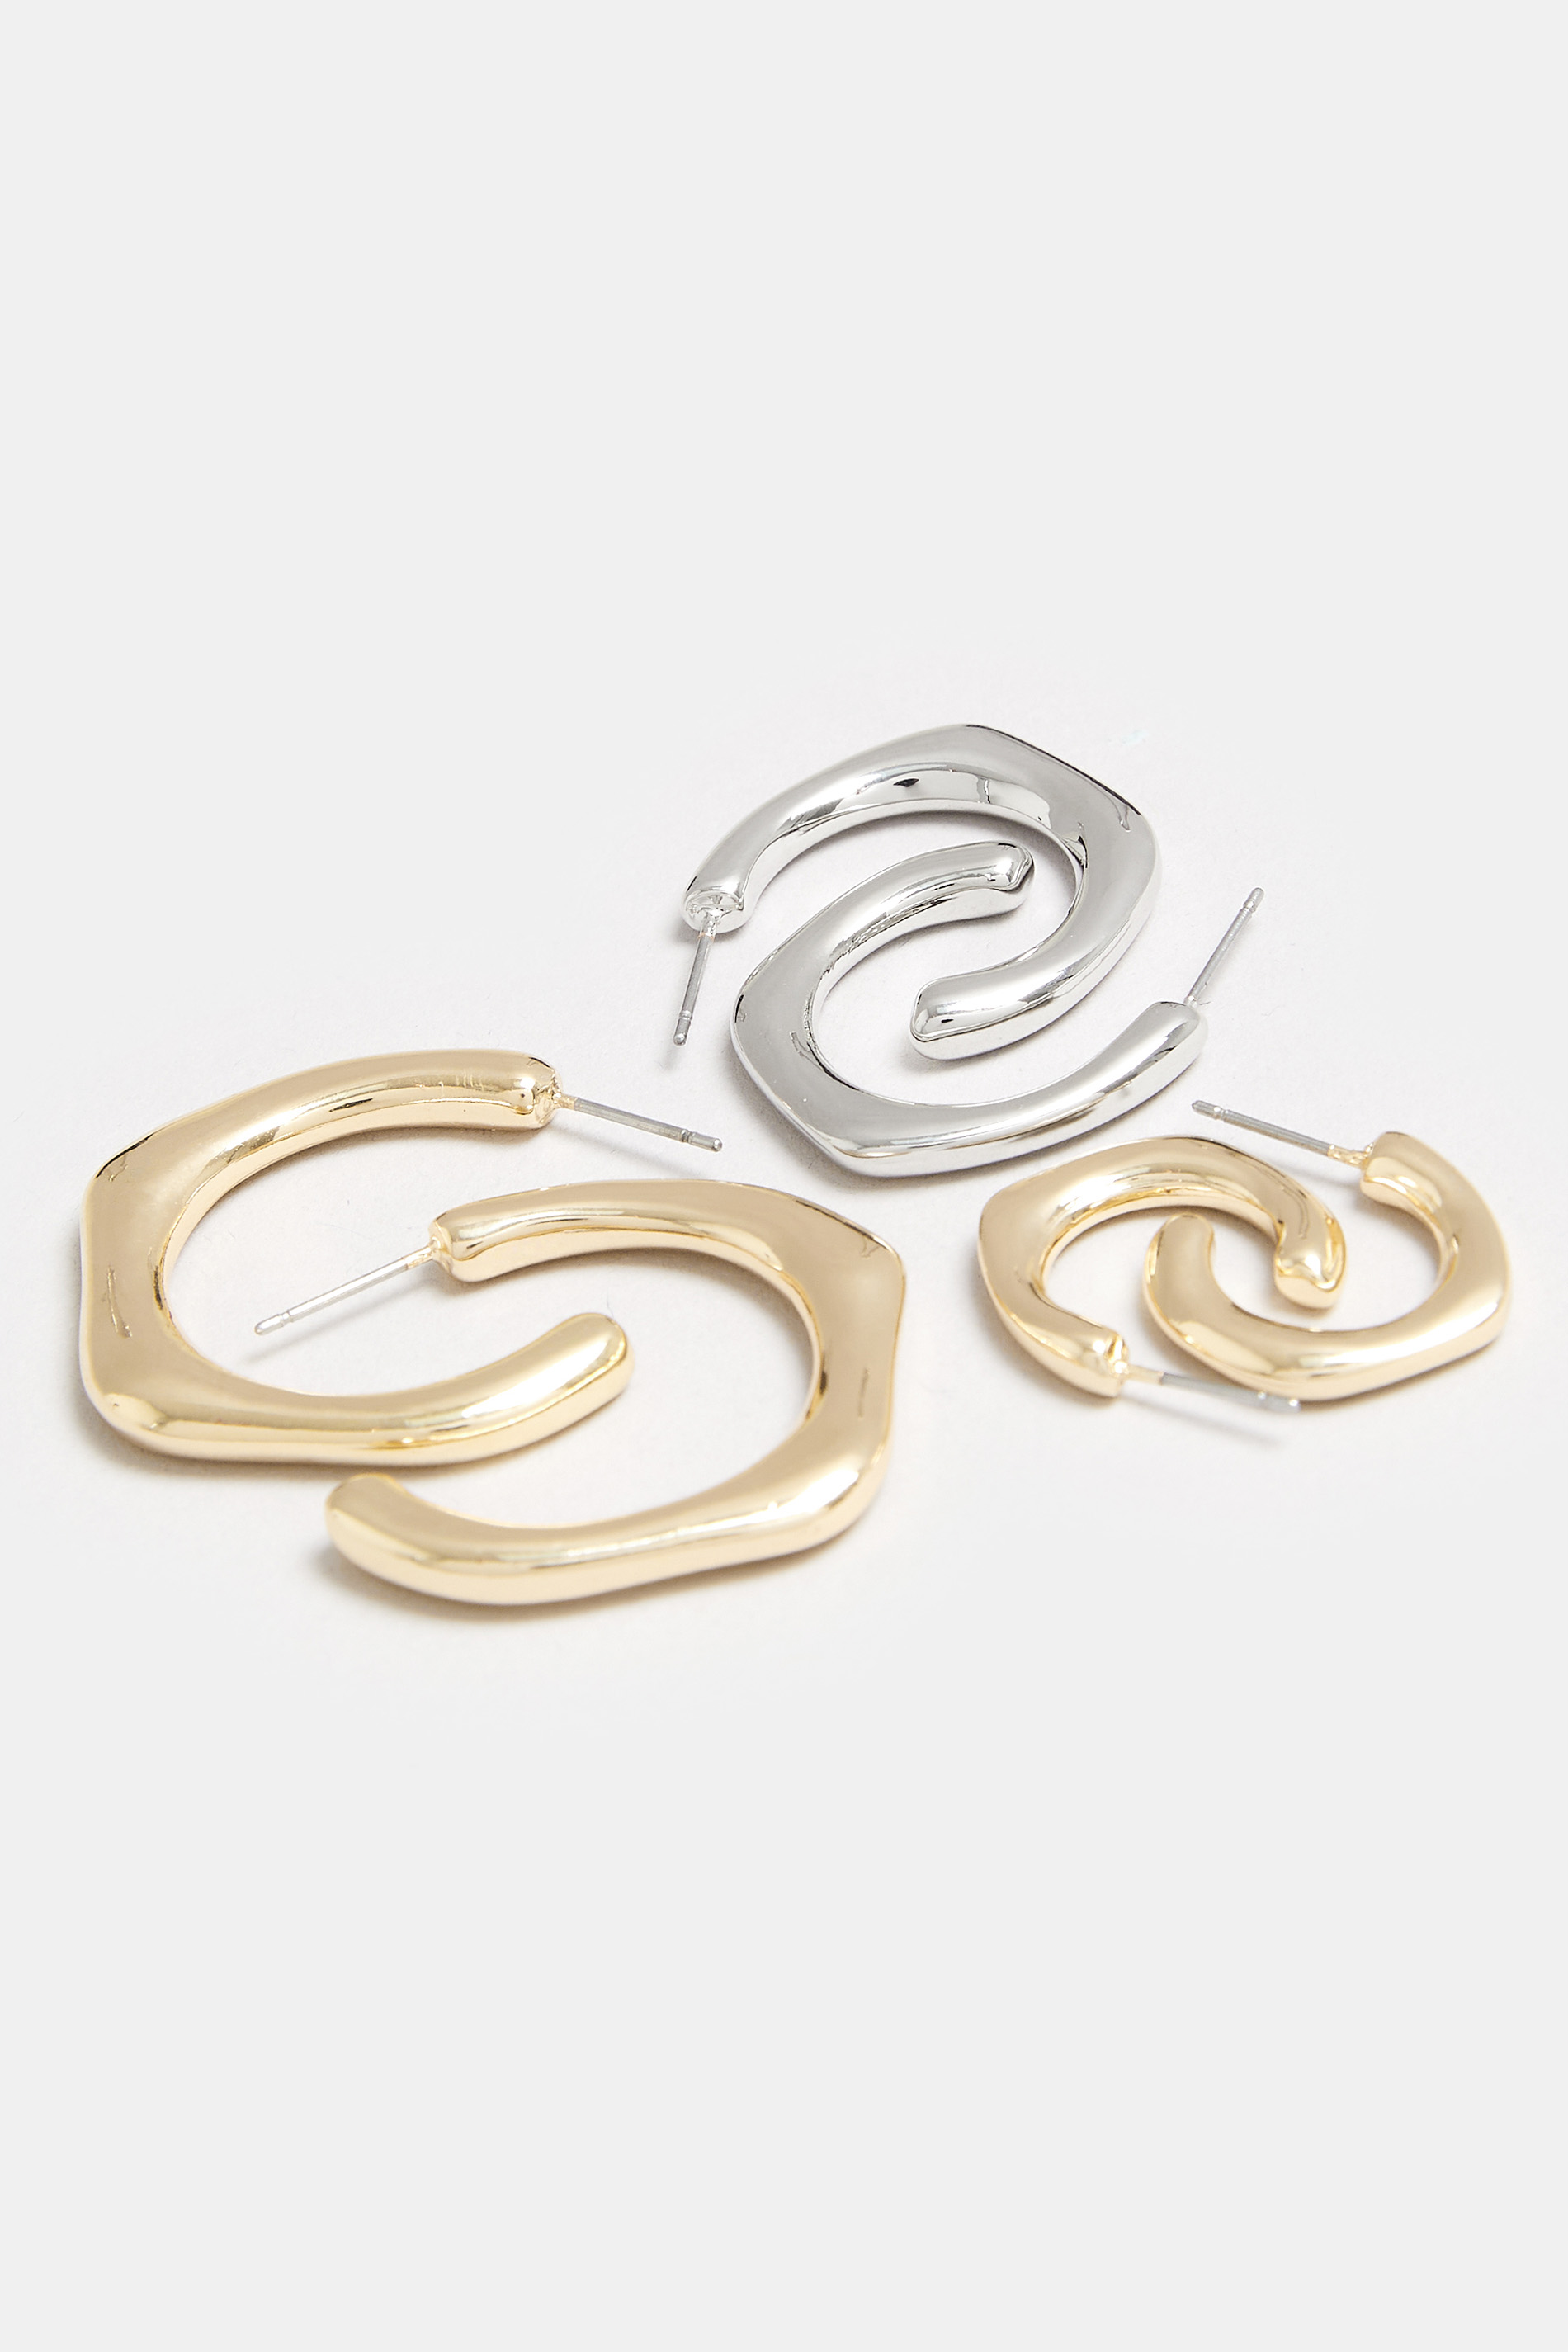 3 PACK Gold & Silver Hoop Earrings Set | Yours Clothing 3